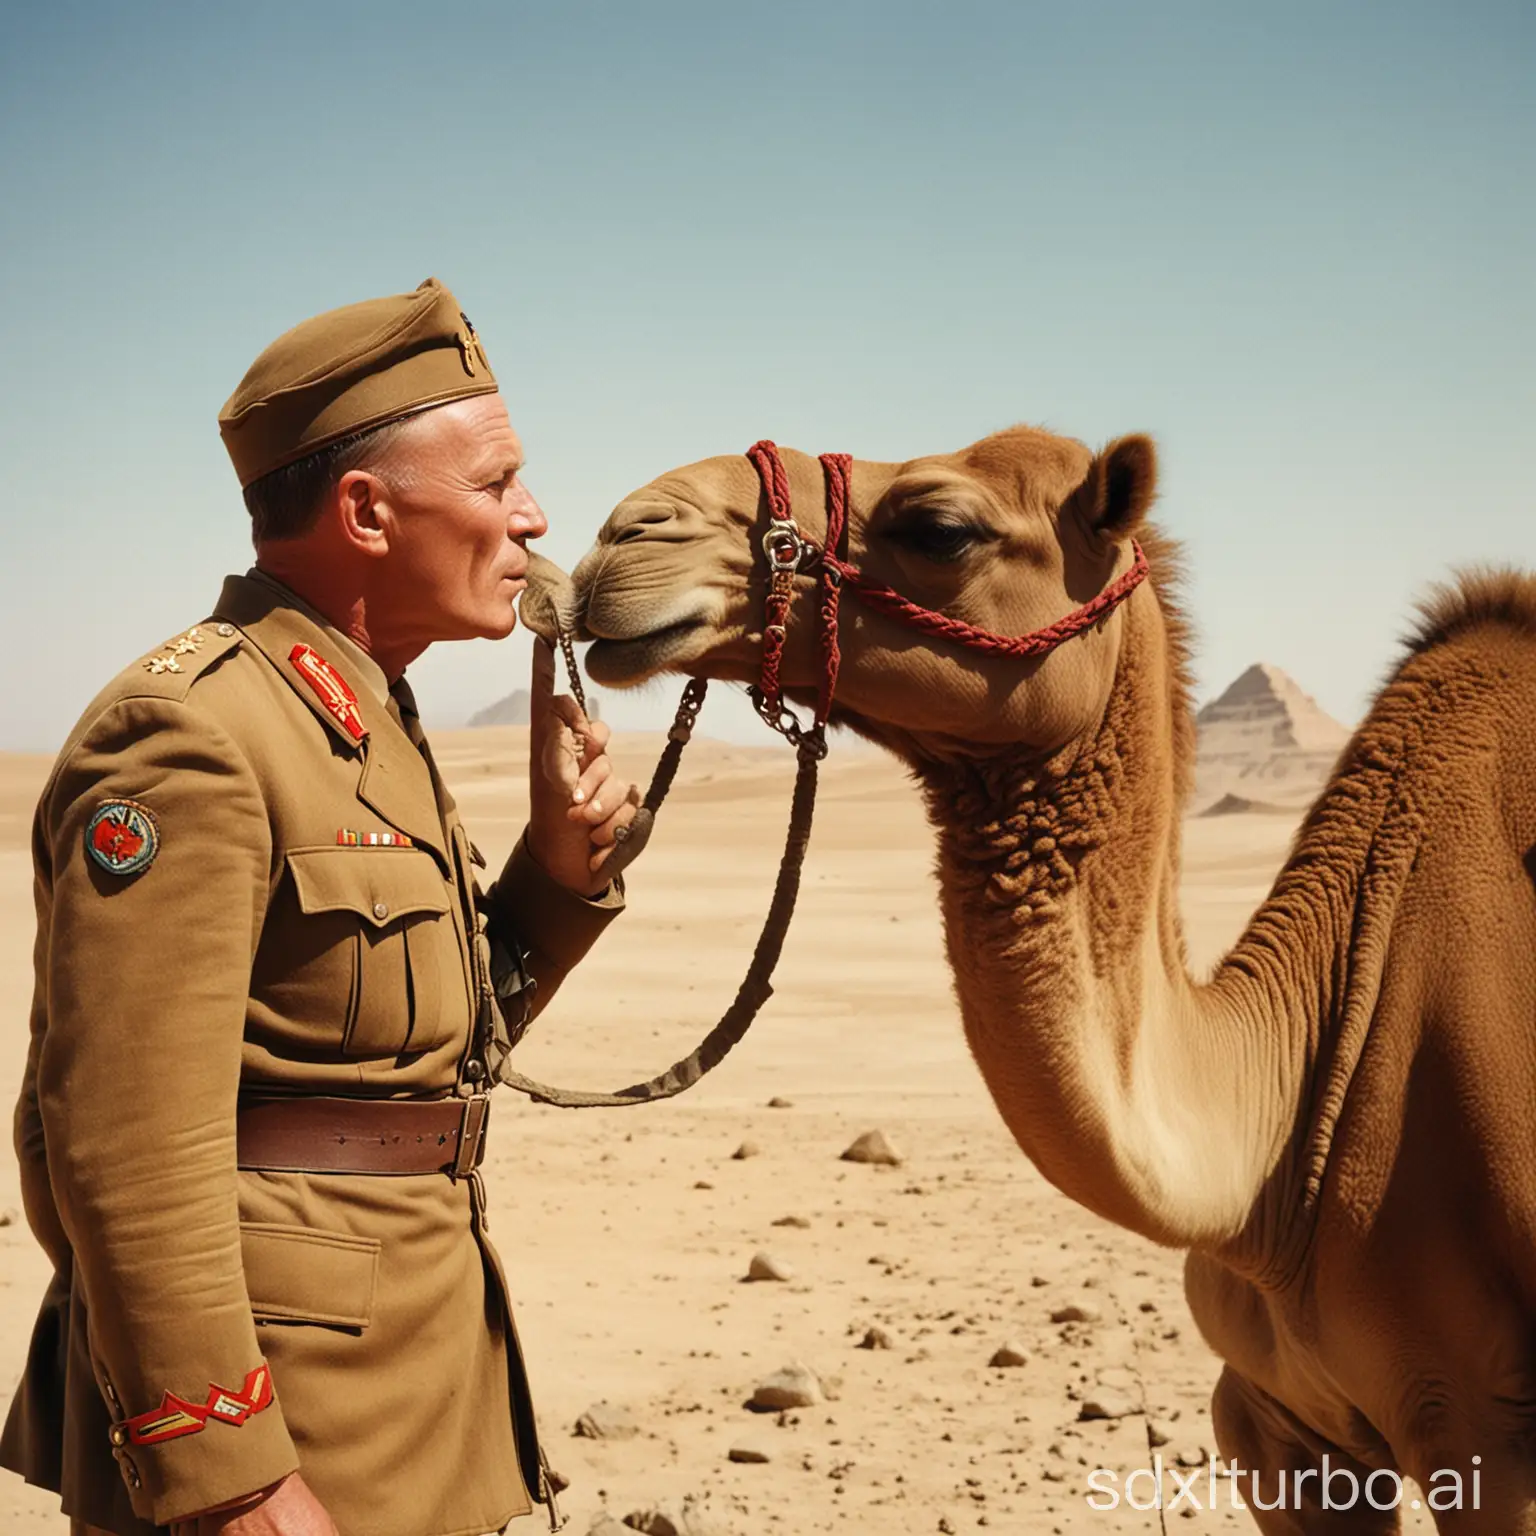 old color photo of Erwin Rommel in brown uniform kissing a camel in the desert